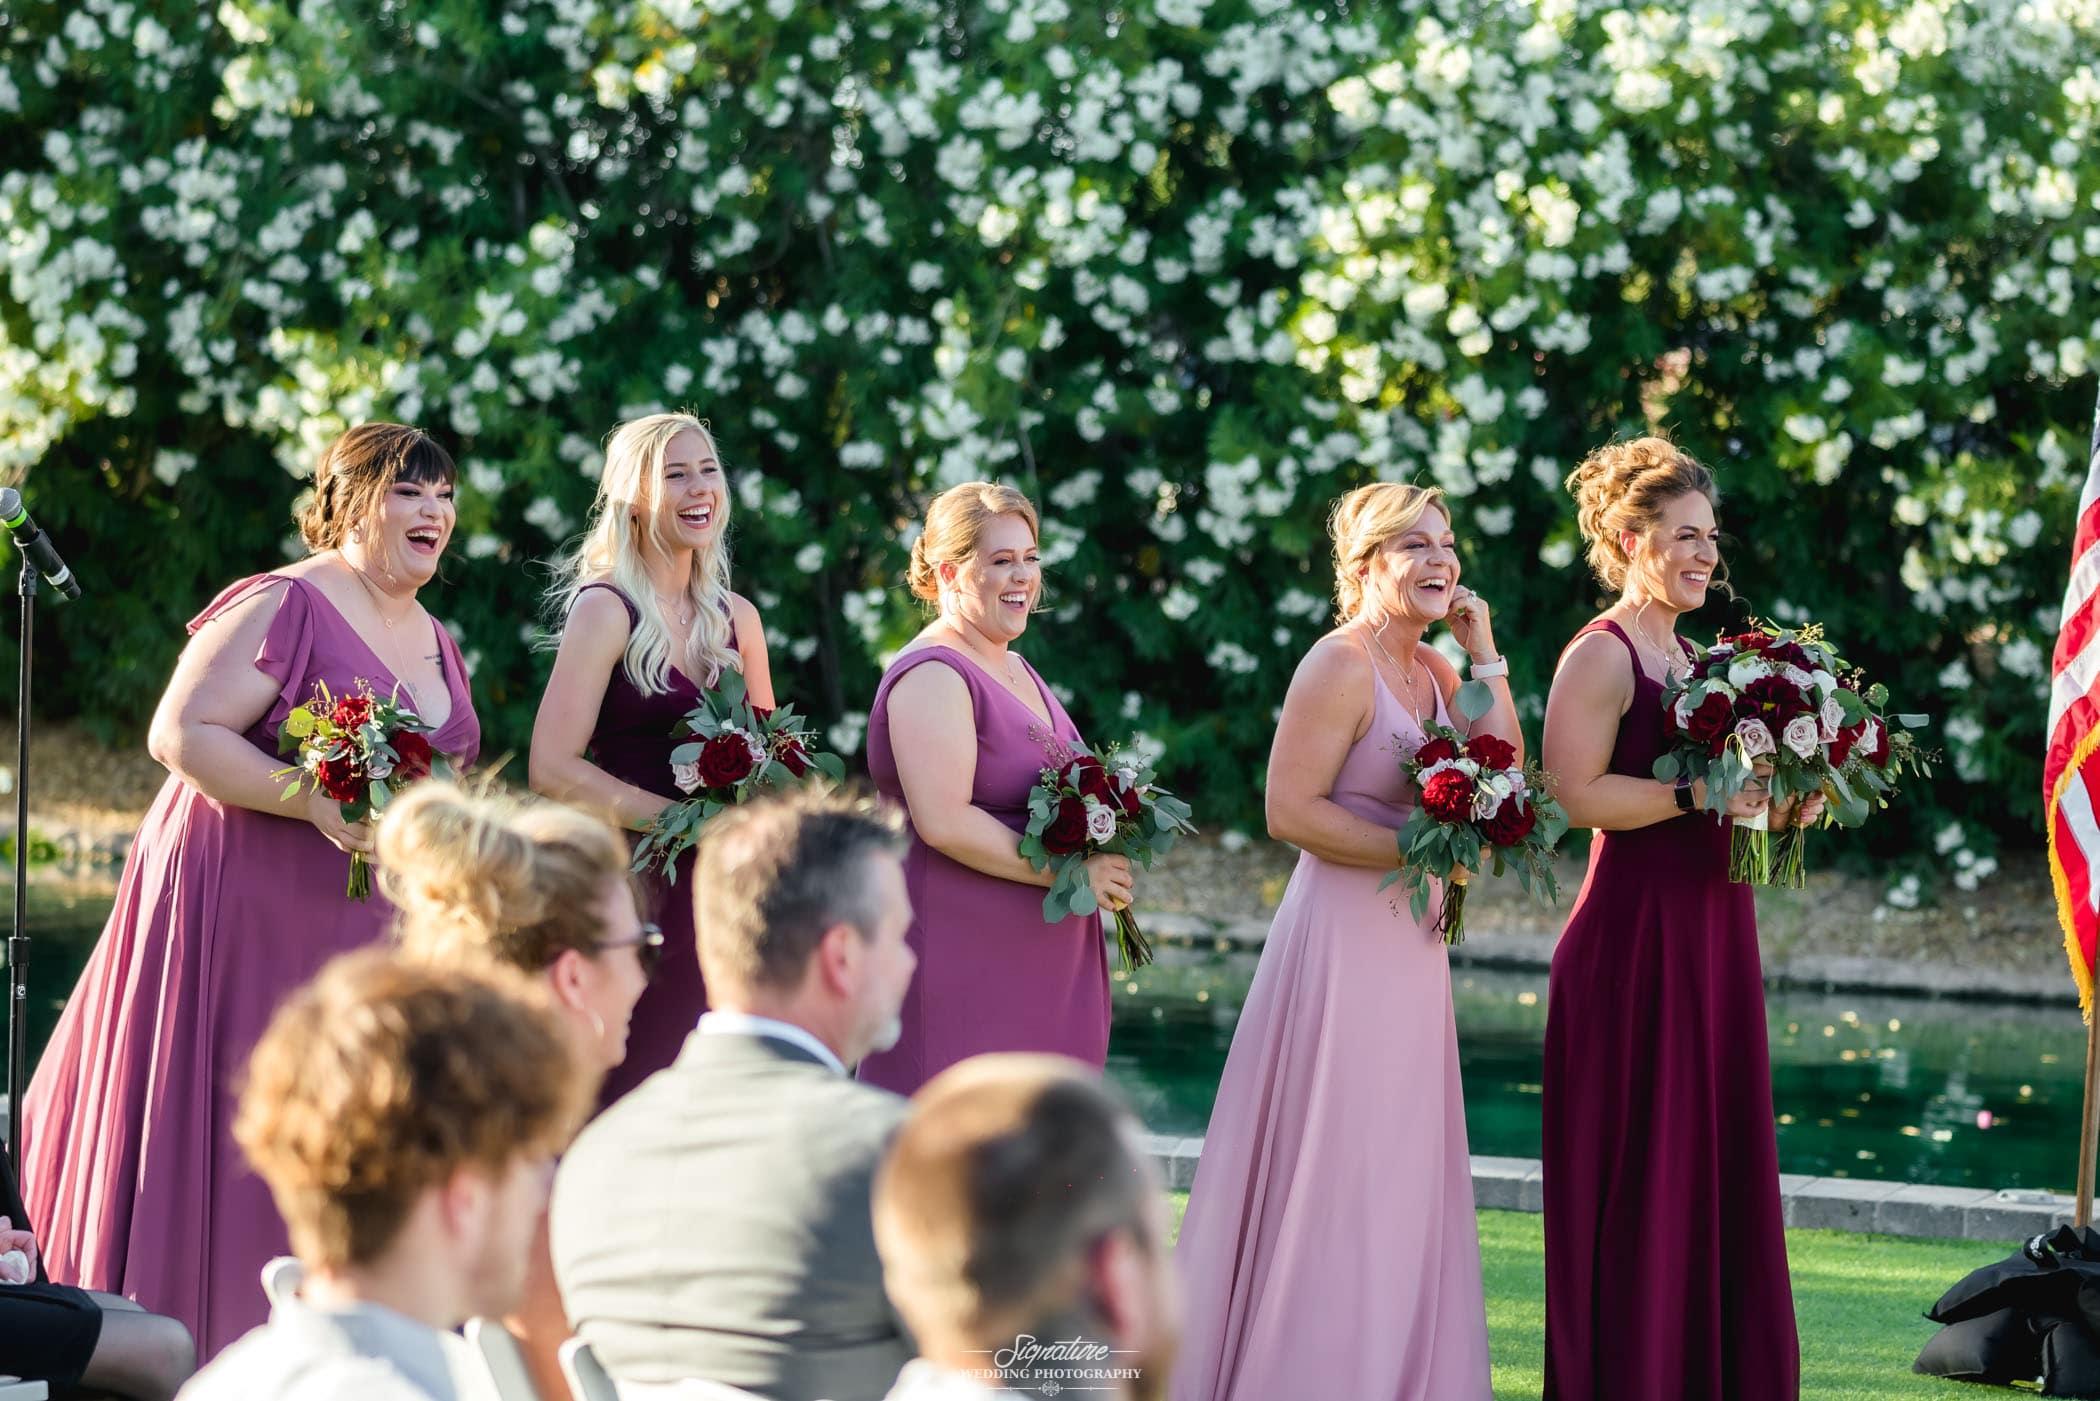 Bridal party smiling during ceremony candid